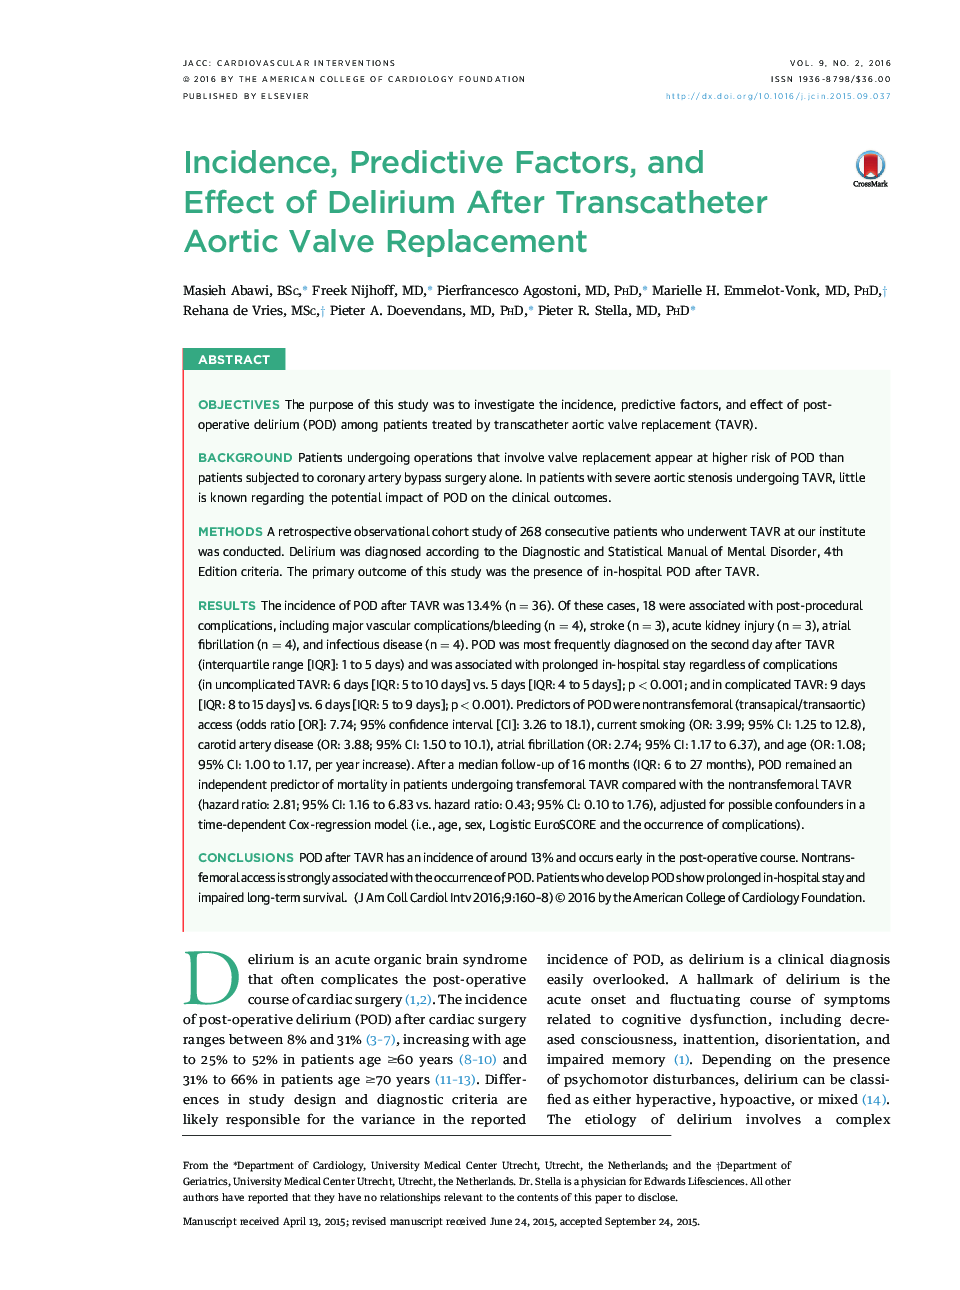 Incidence, Predictive Factors, and Effect of Delirium After Transcatheter Aortic Valve Replacement 